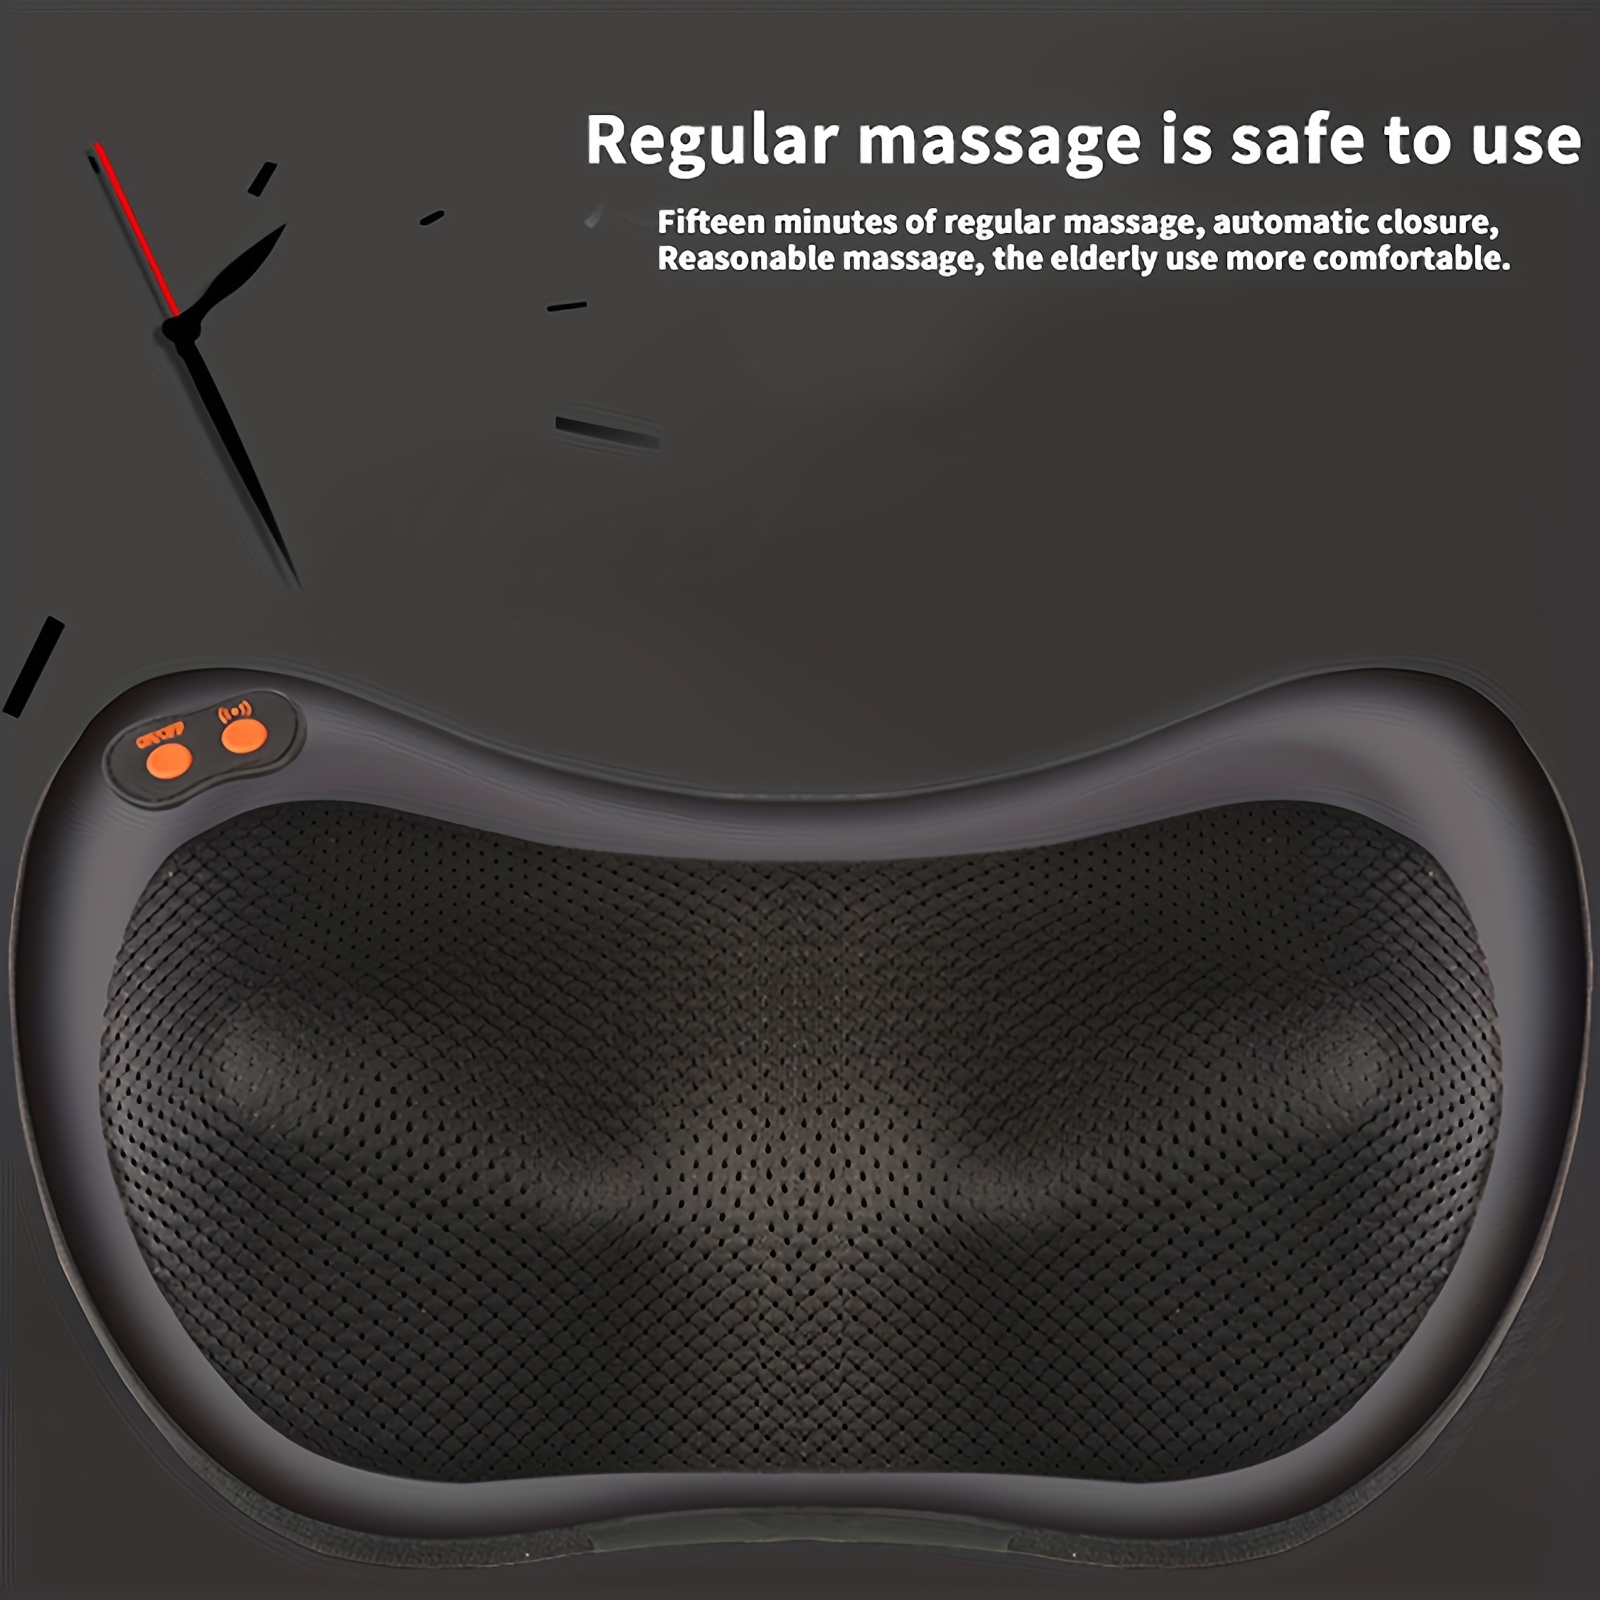 Zyllion Shiatsu Back and Neck Massager - Kneading Massage Pillow with Heat  for Shoulders, Lower Back, Calf 